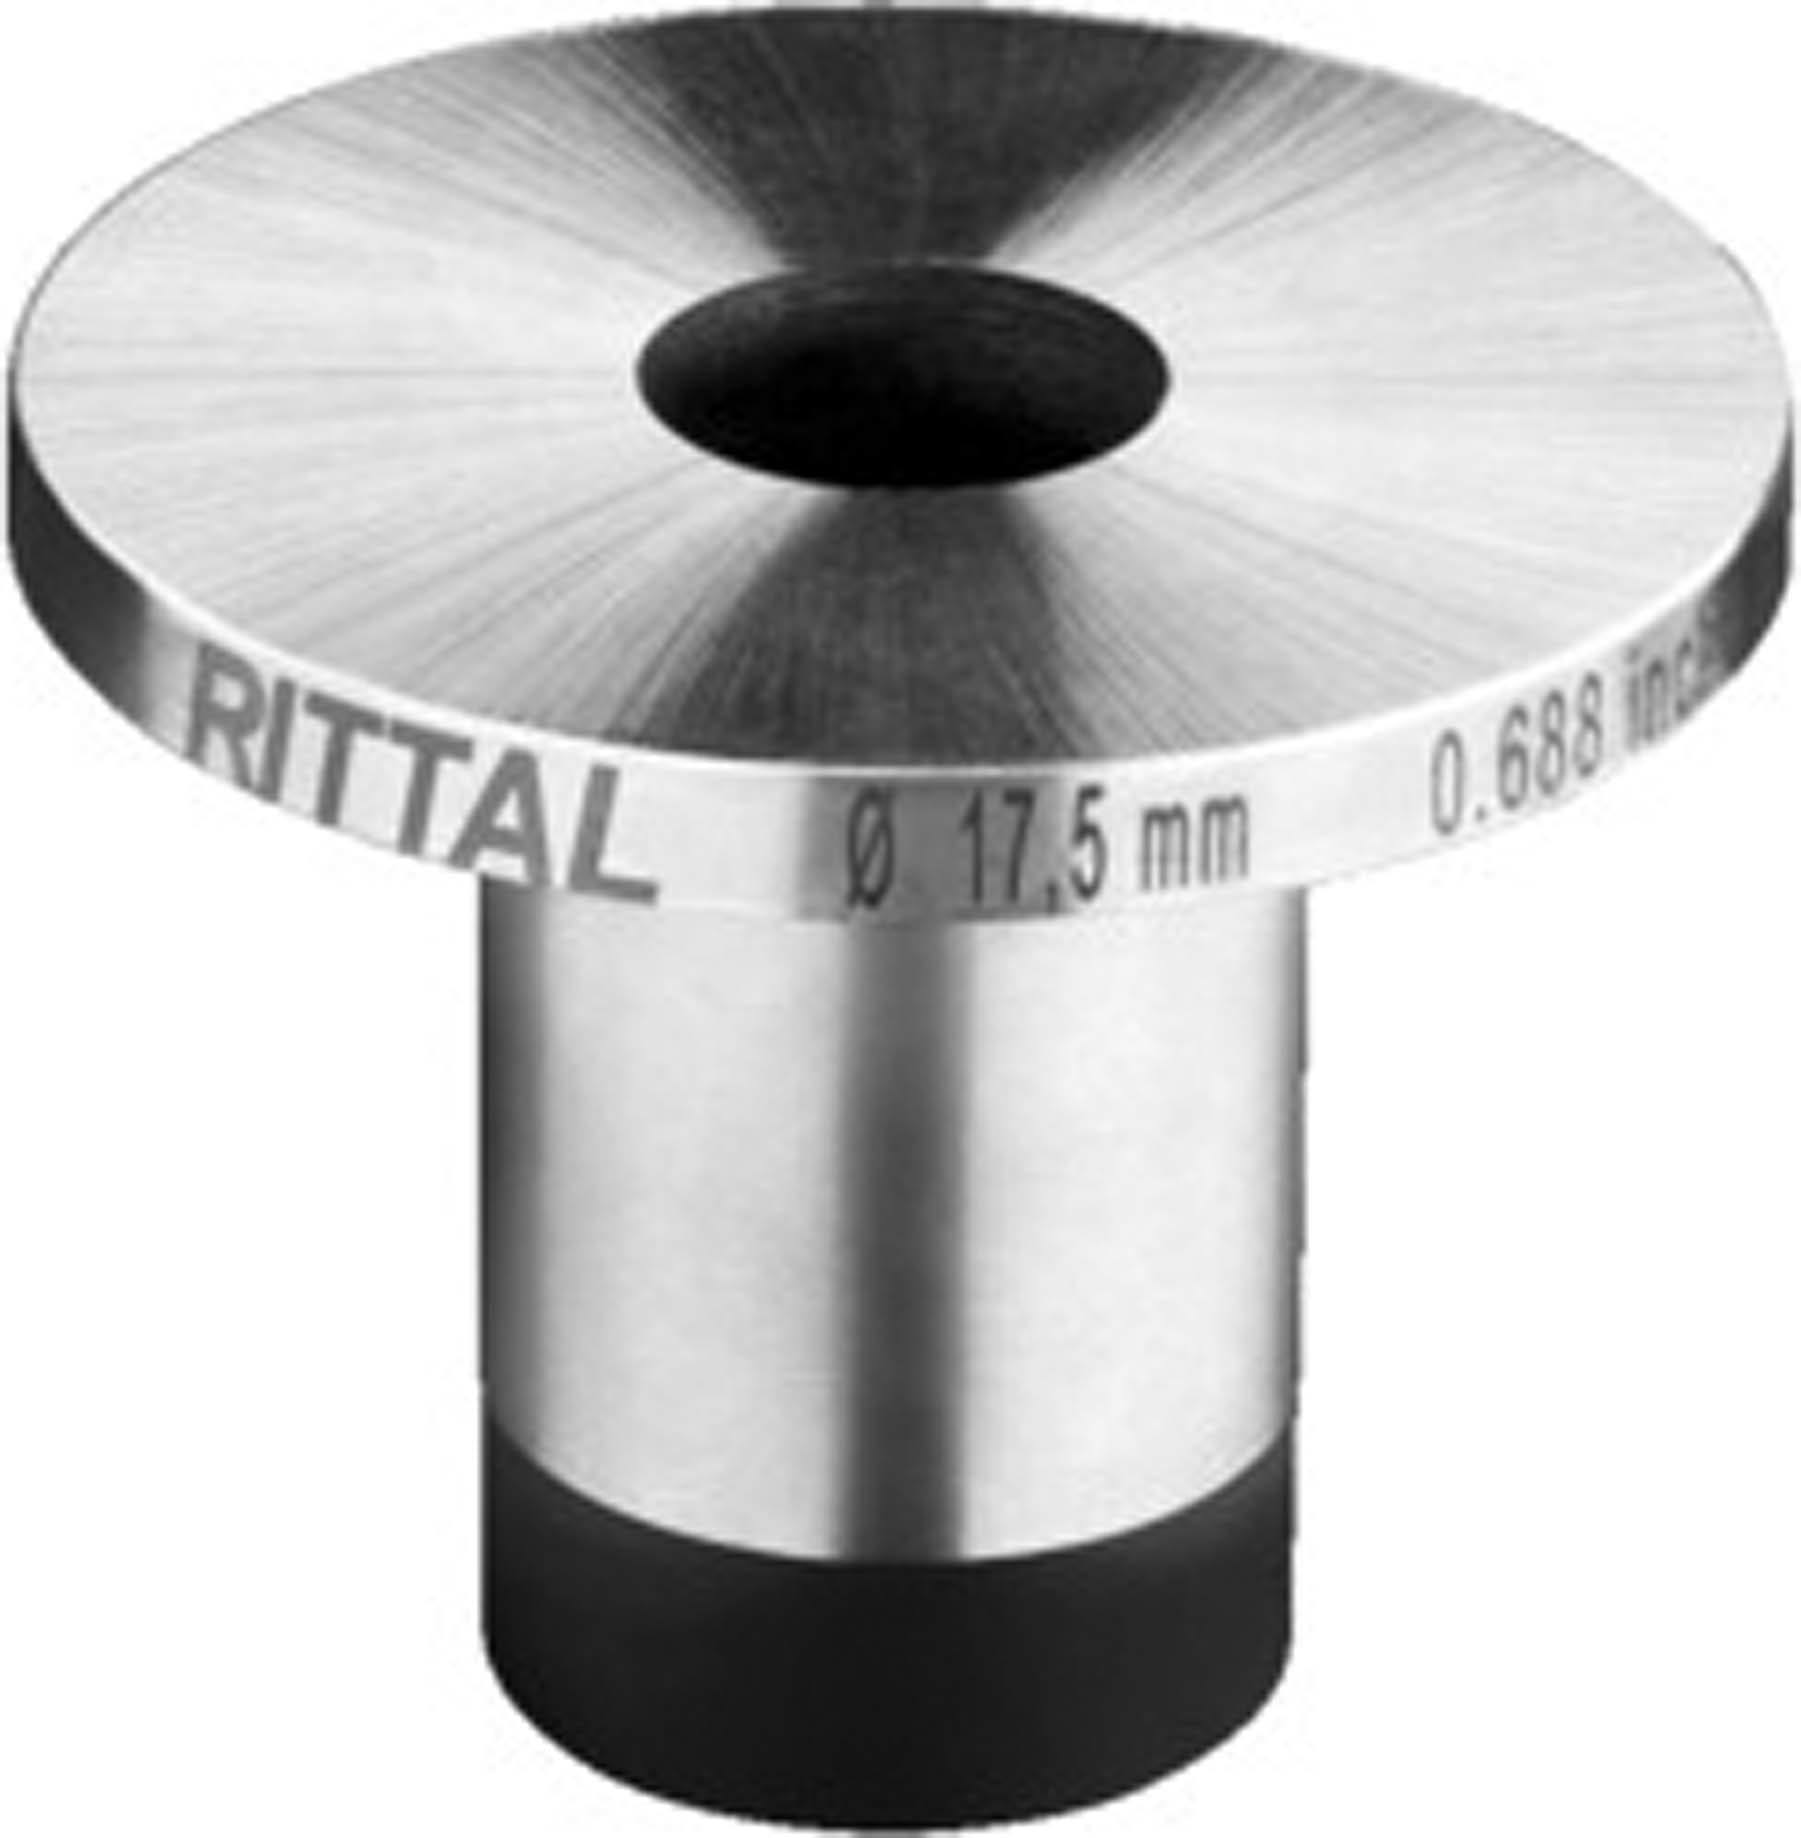 Rittal - Matrice ronde 9,5 mm gamme automation systems